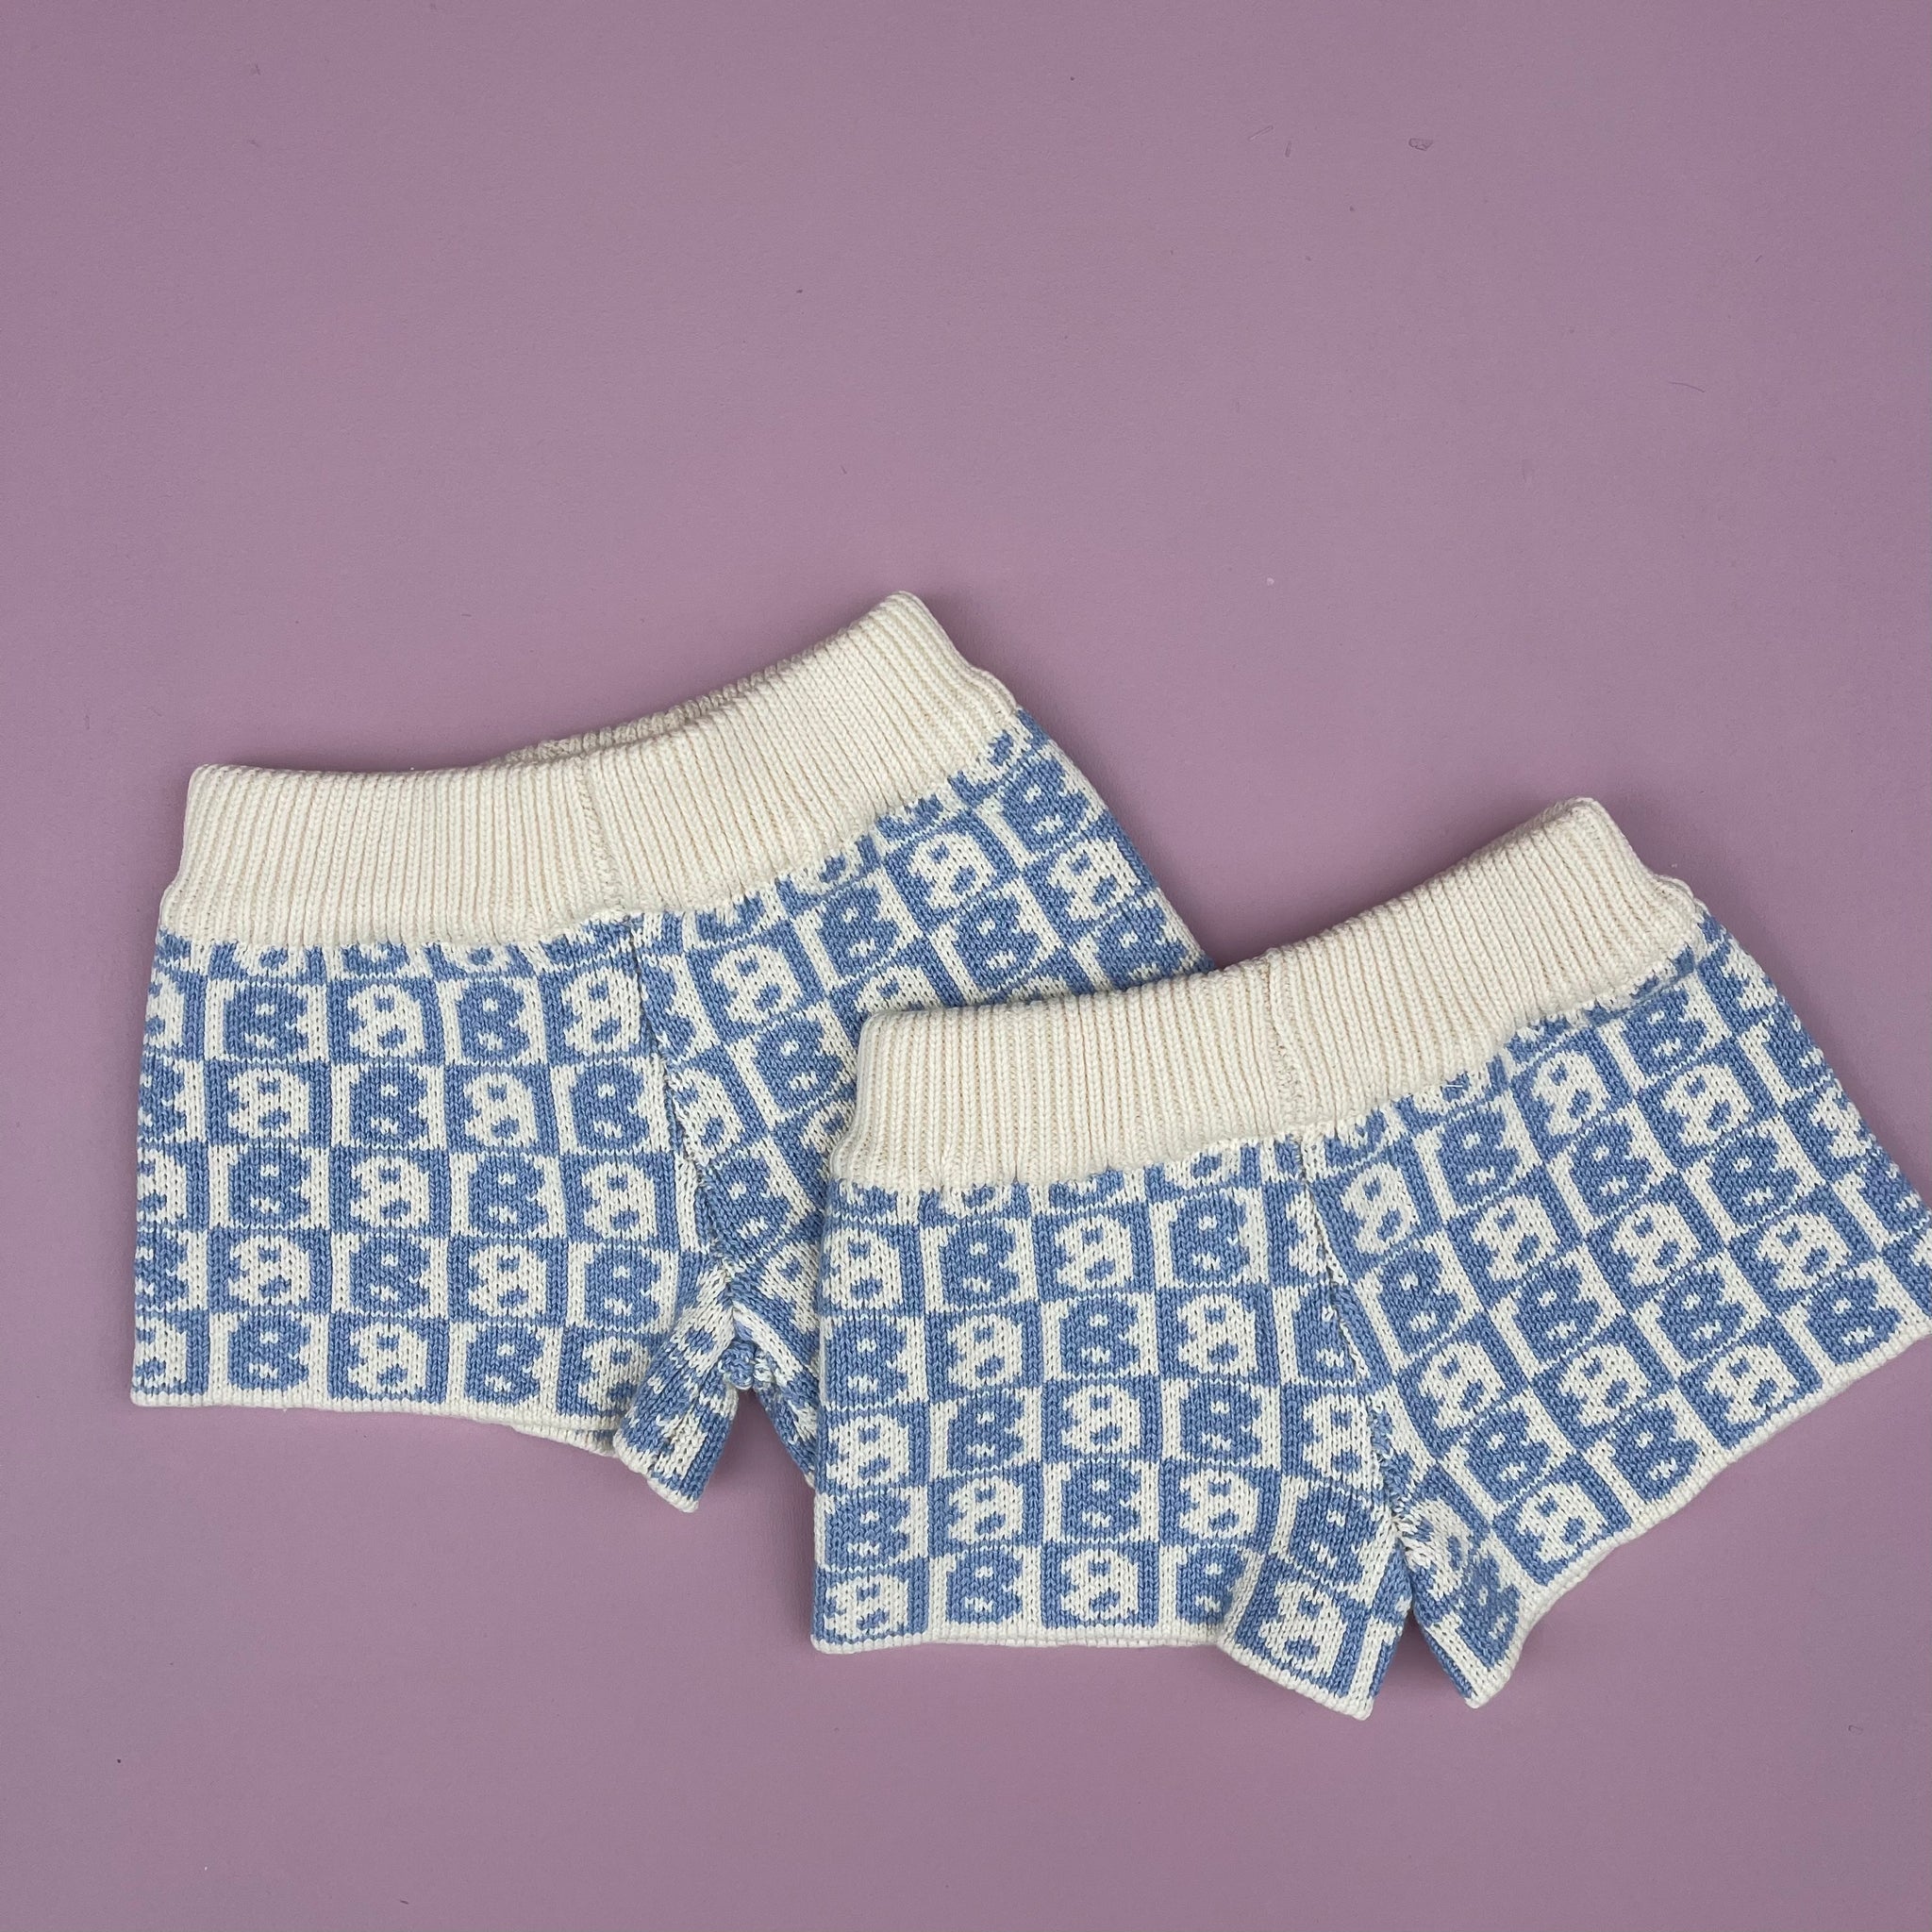 By Billie - BB knit shorties